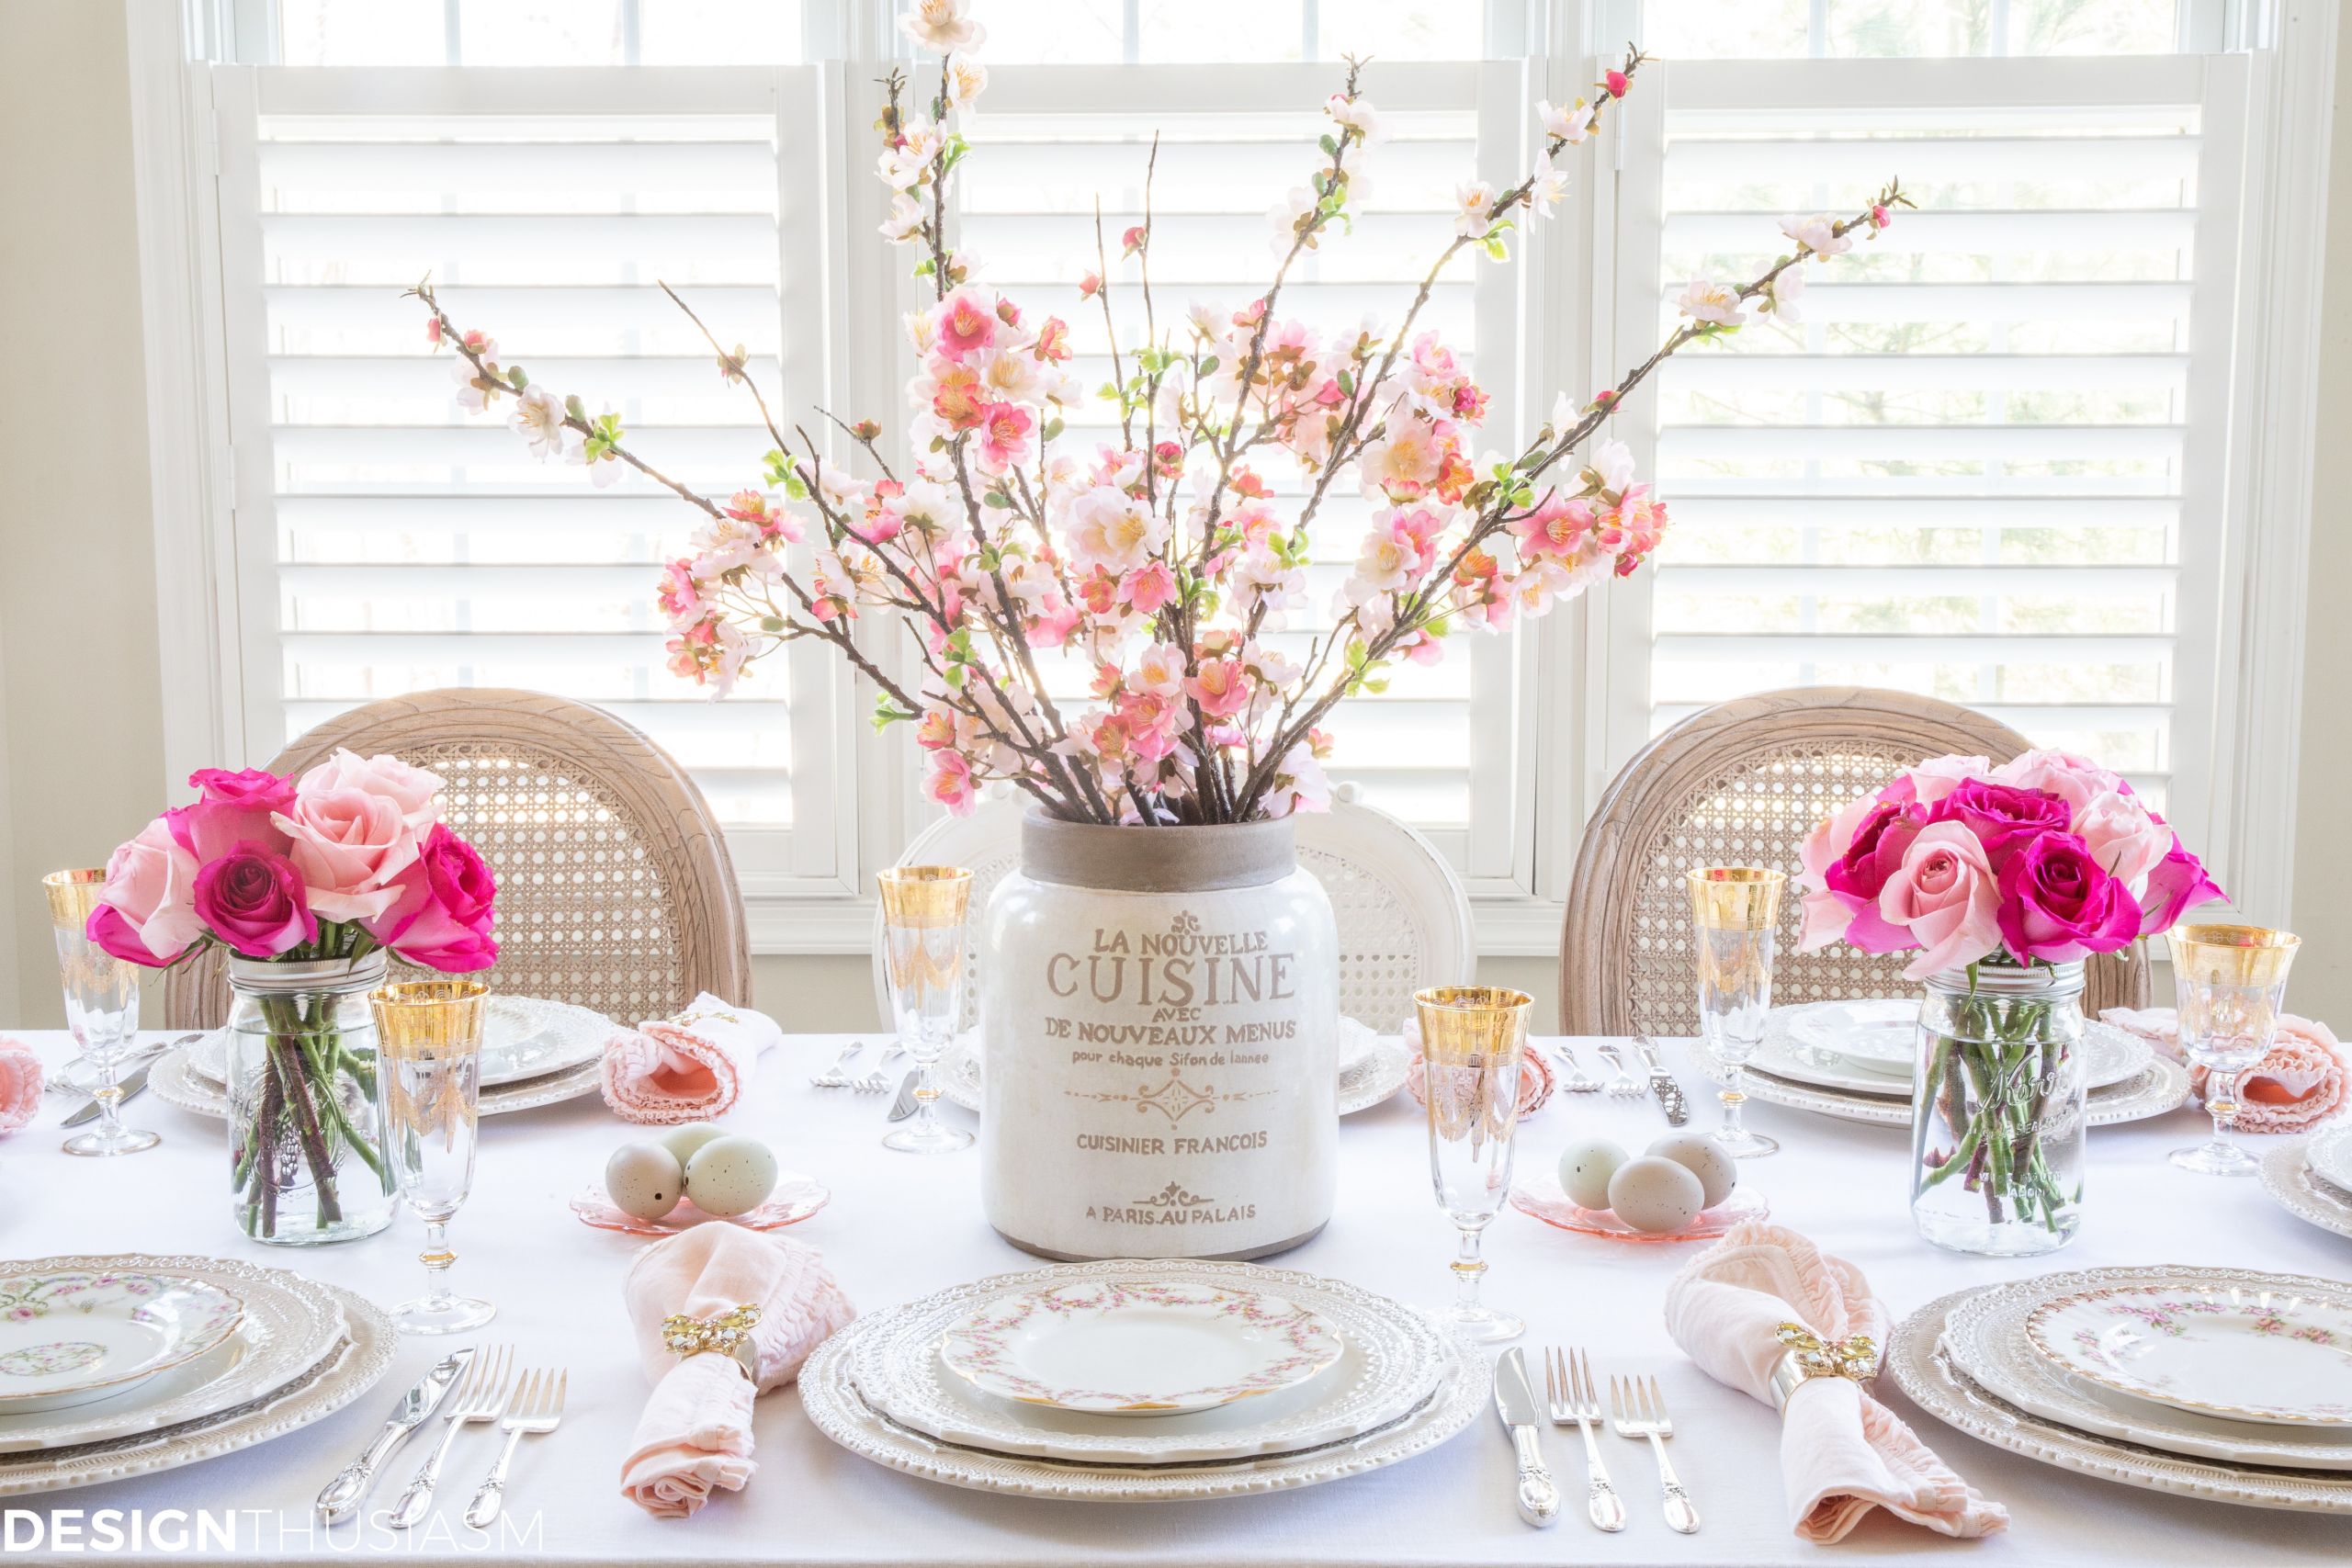 Easter Table Decor
 Easter Ideas Using Blush Pink in Your Easter Table Decor